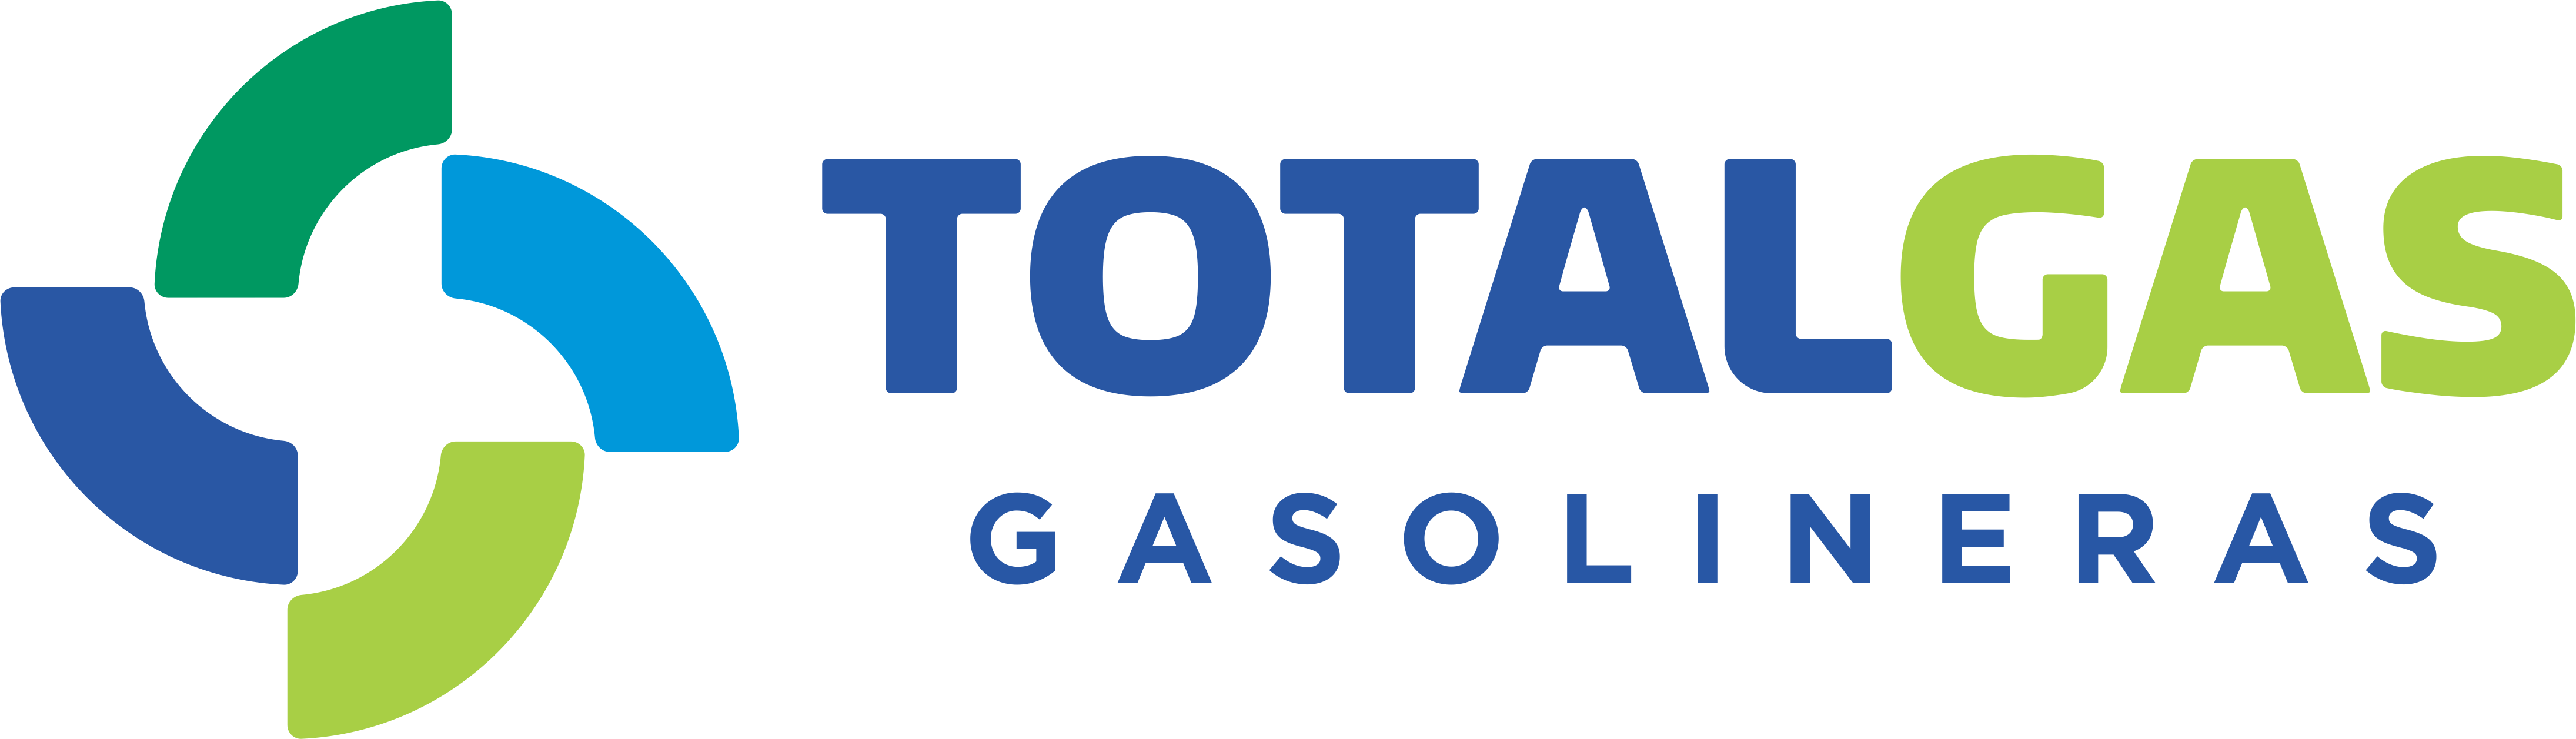 TOTAL GAS